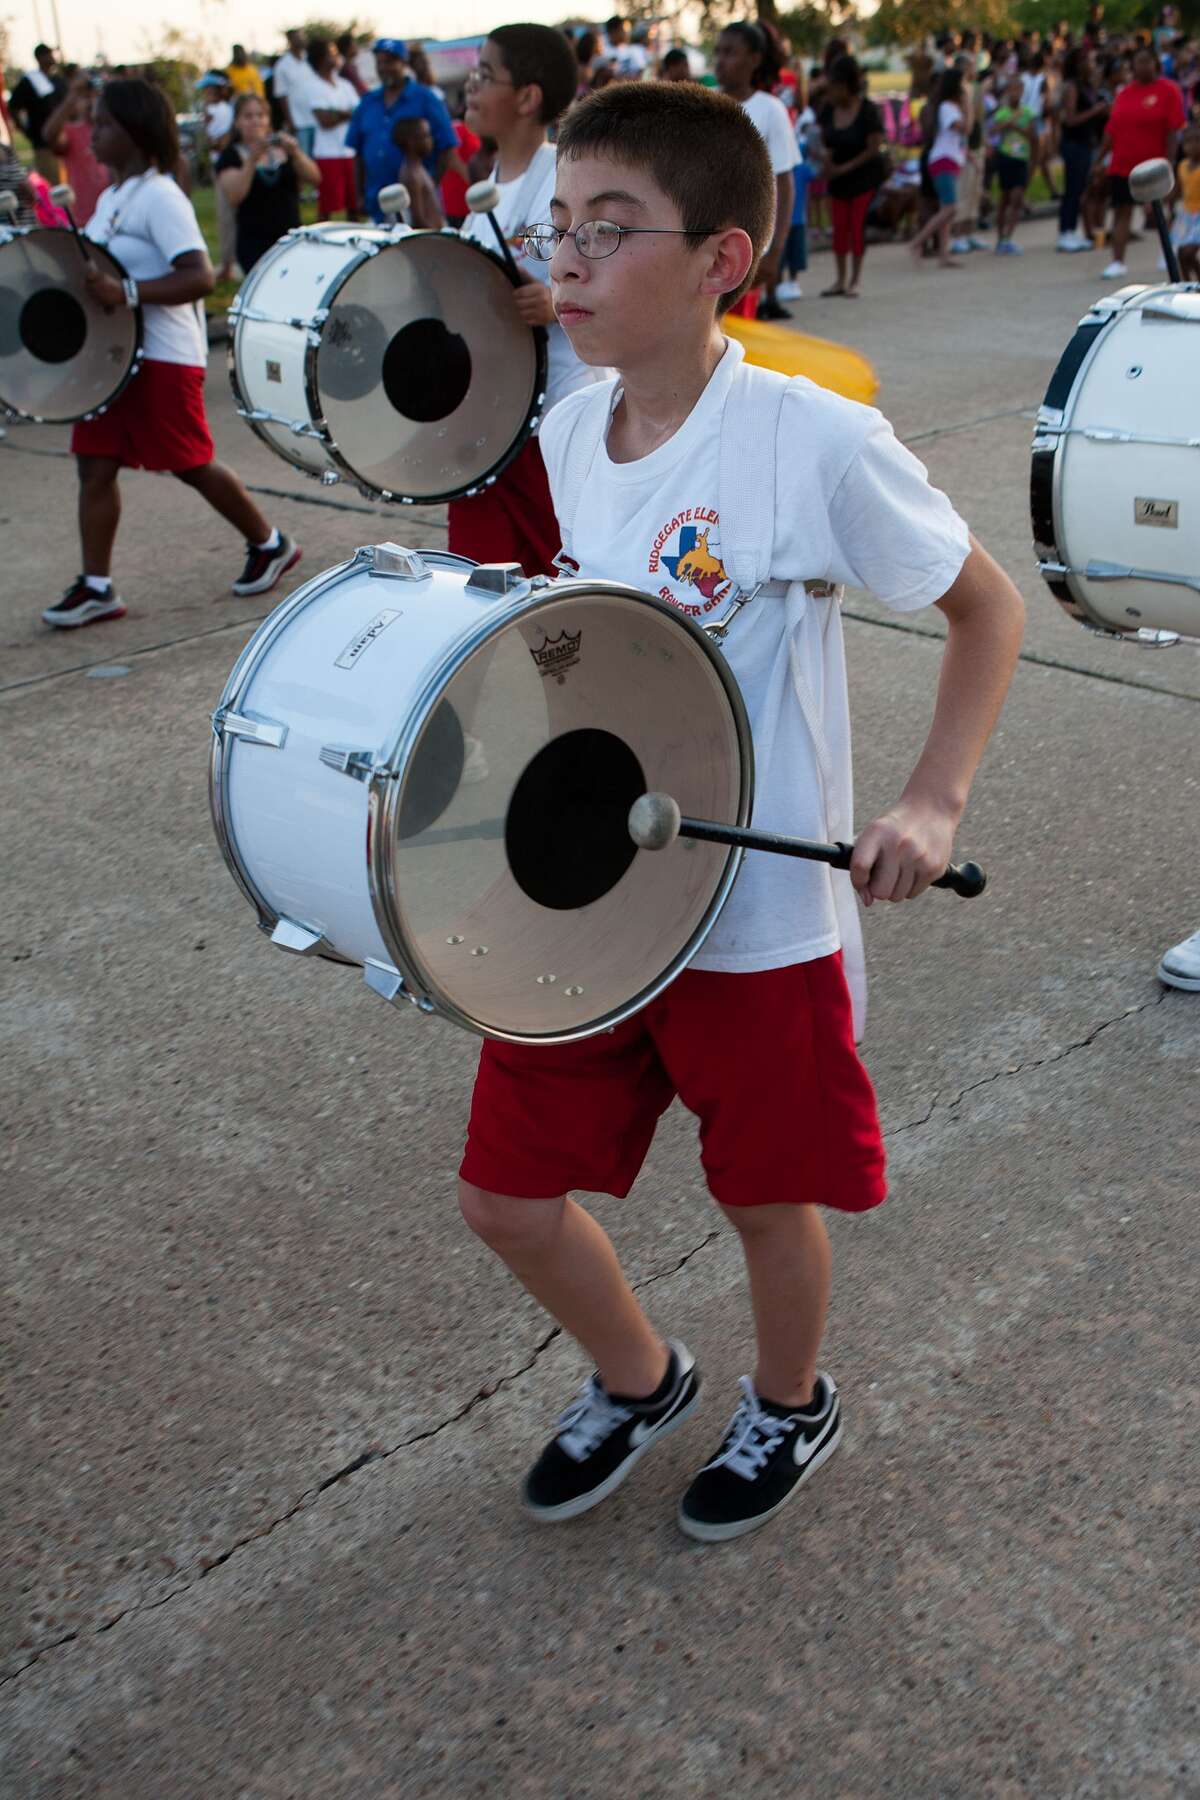 Carlos Guzman, 11, g7, of the Ridgegate ES Rangers Marching Band at the Tenth annual Missouri City Juneteenth Parade.